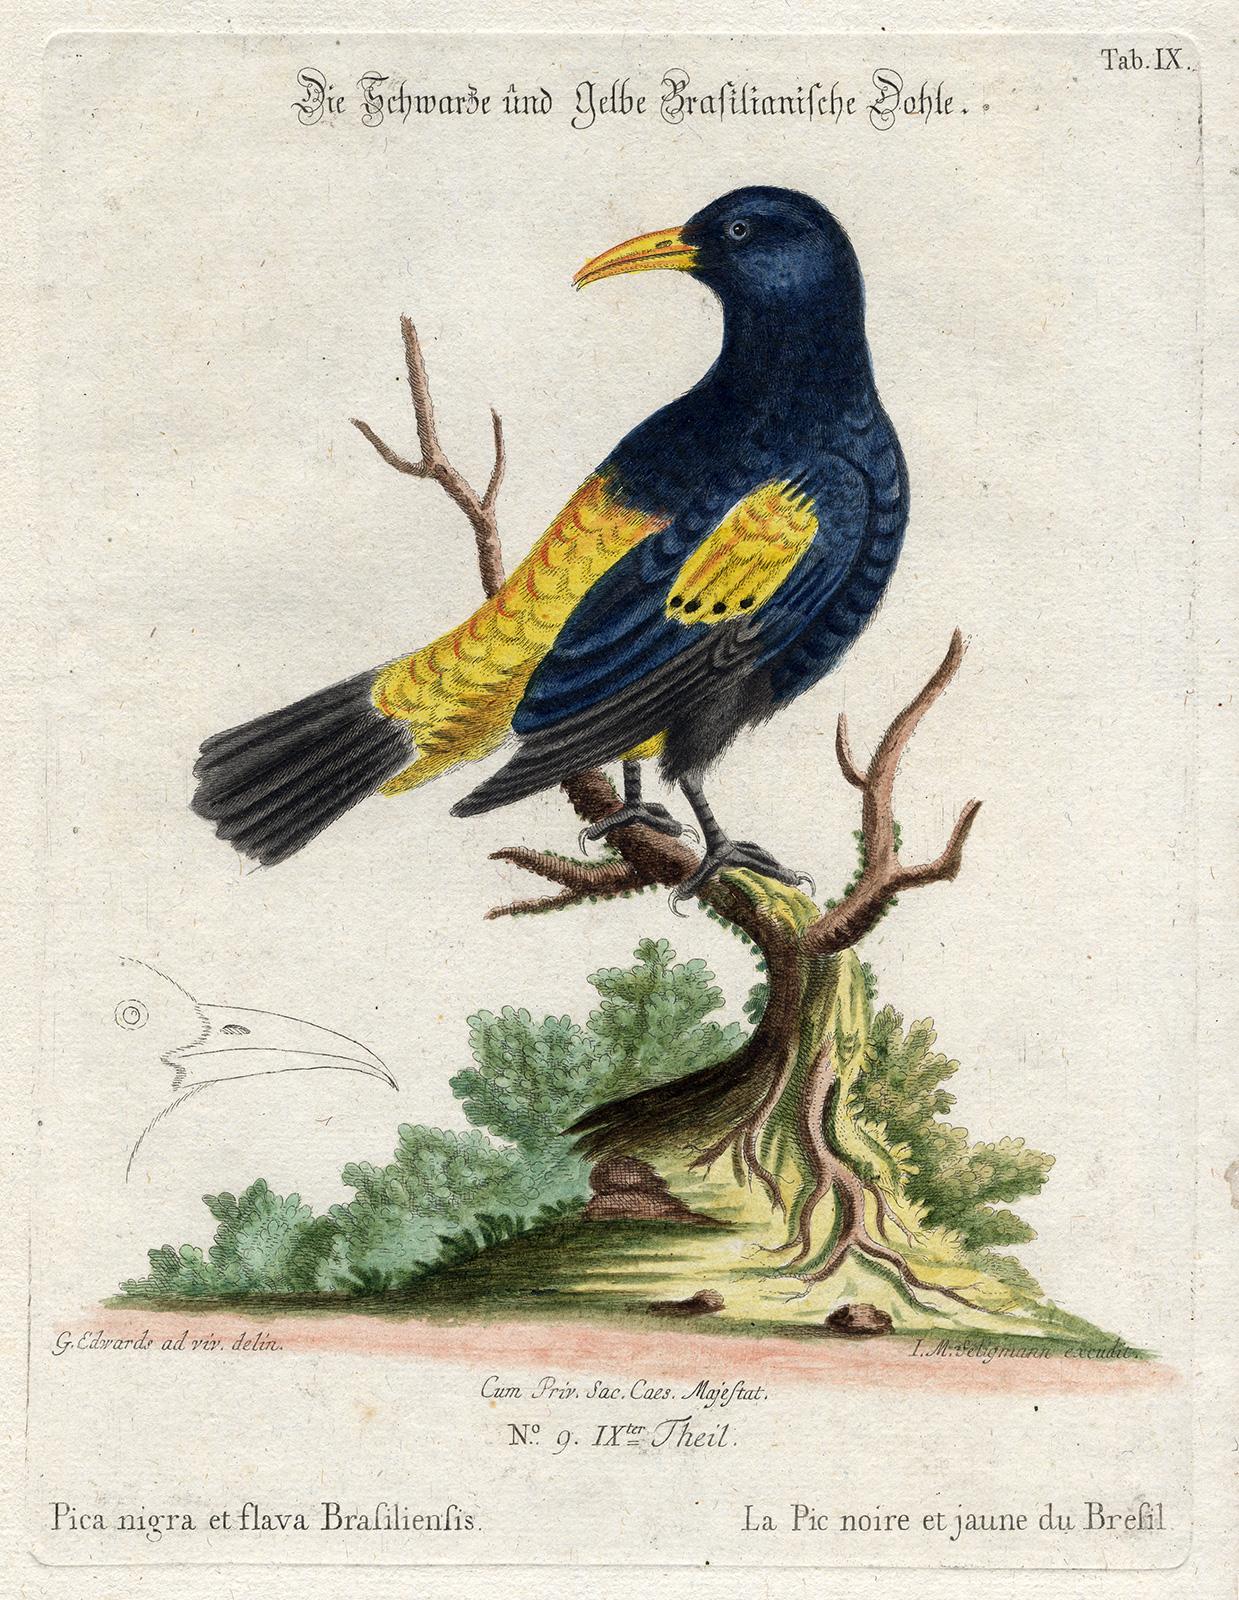 Black and Yellow Daw by Seligmann - Handcoloured etching - 18th century - Print by Johann Michael Seligmann